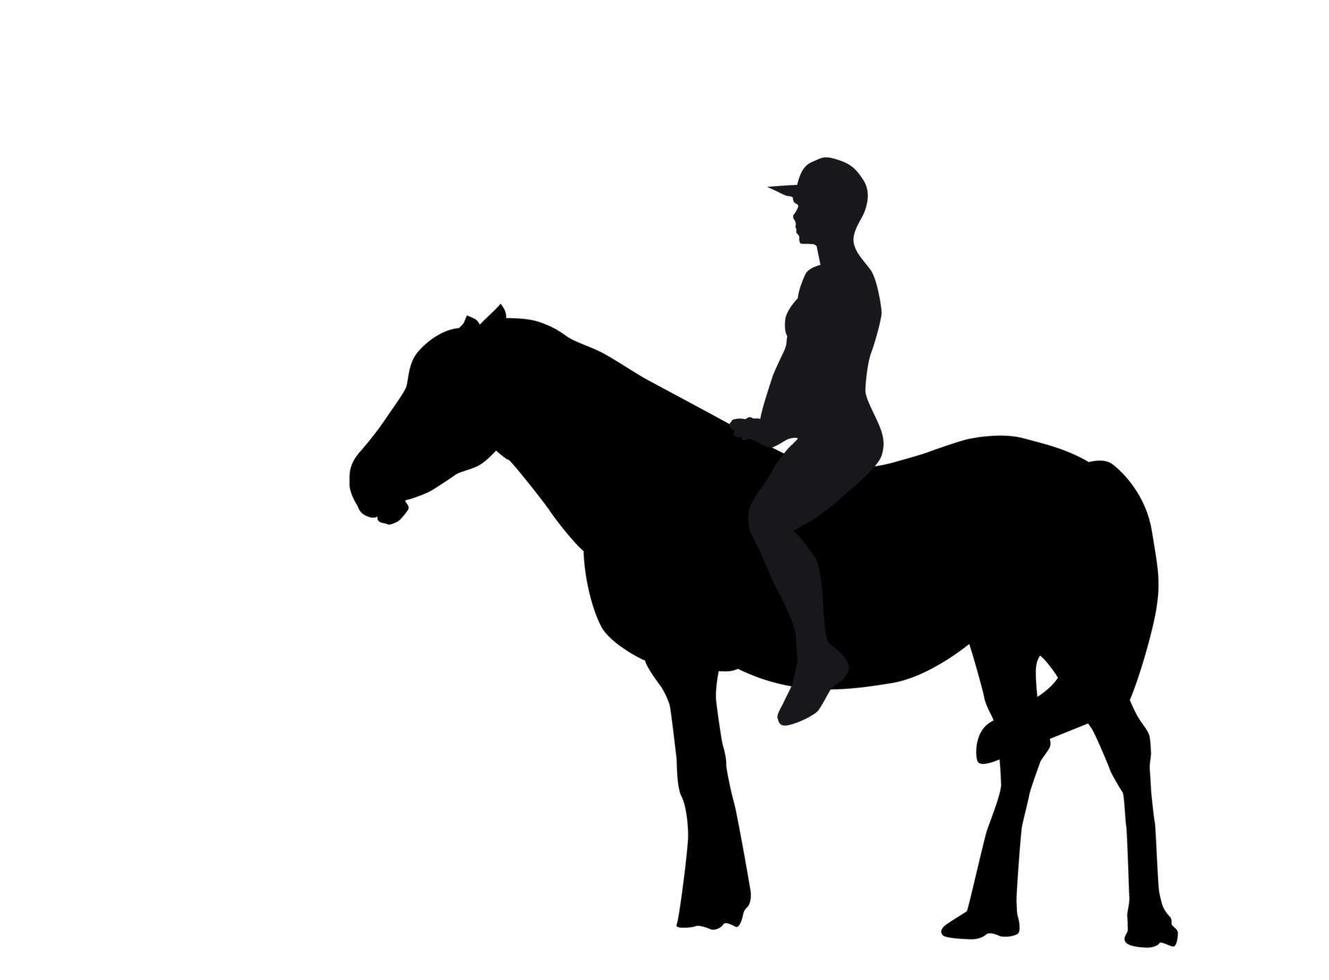 Silhouette of the Rider on the Horse. Vector Illustration.